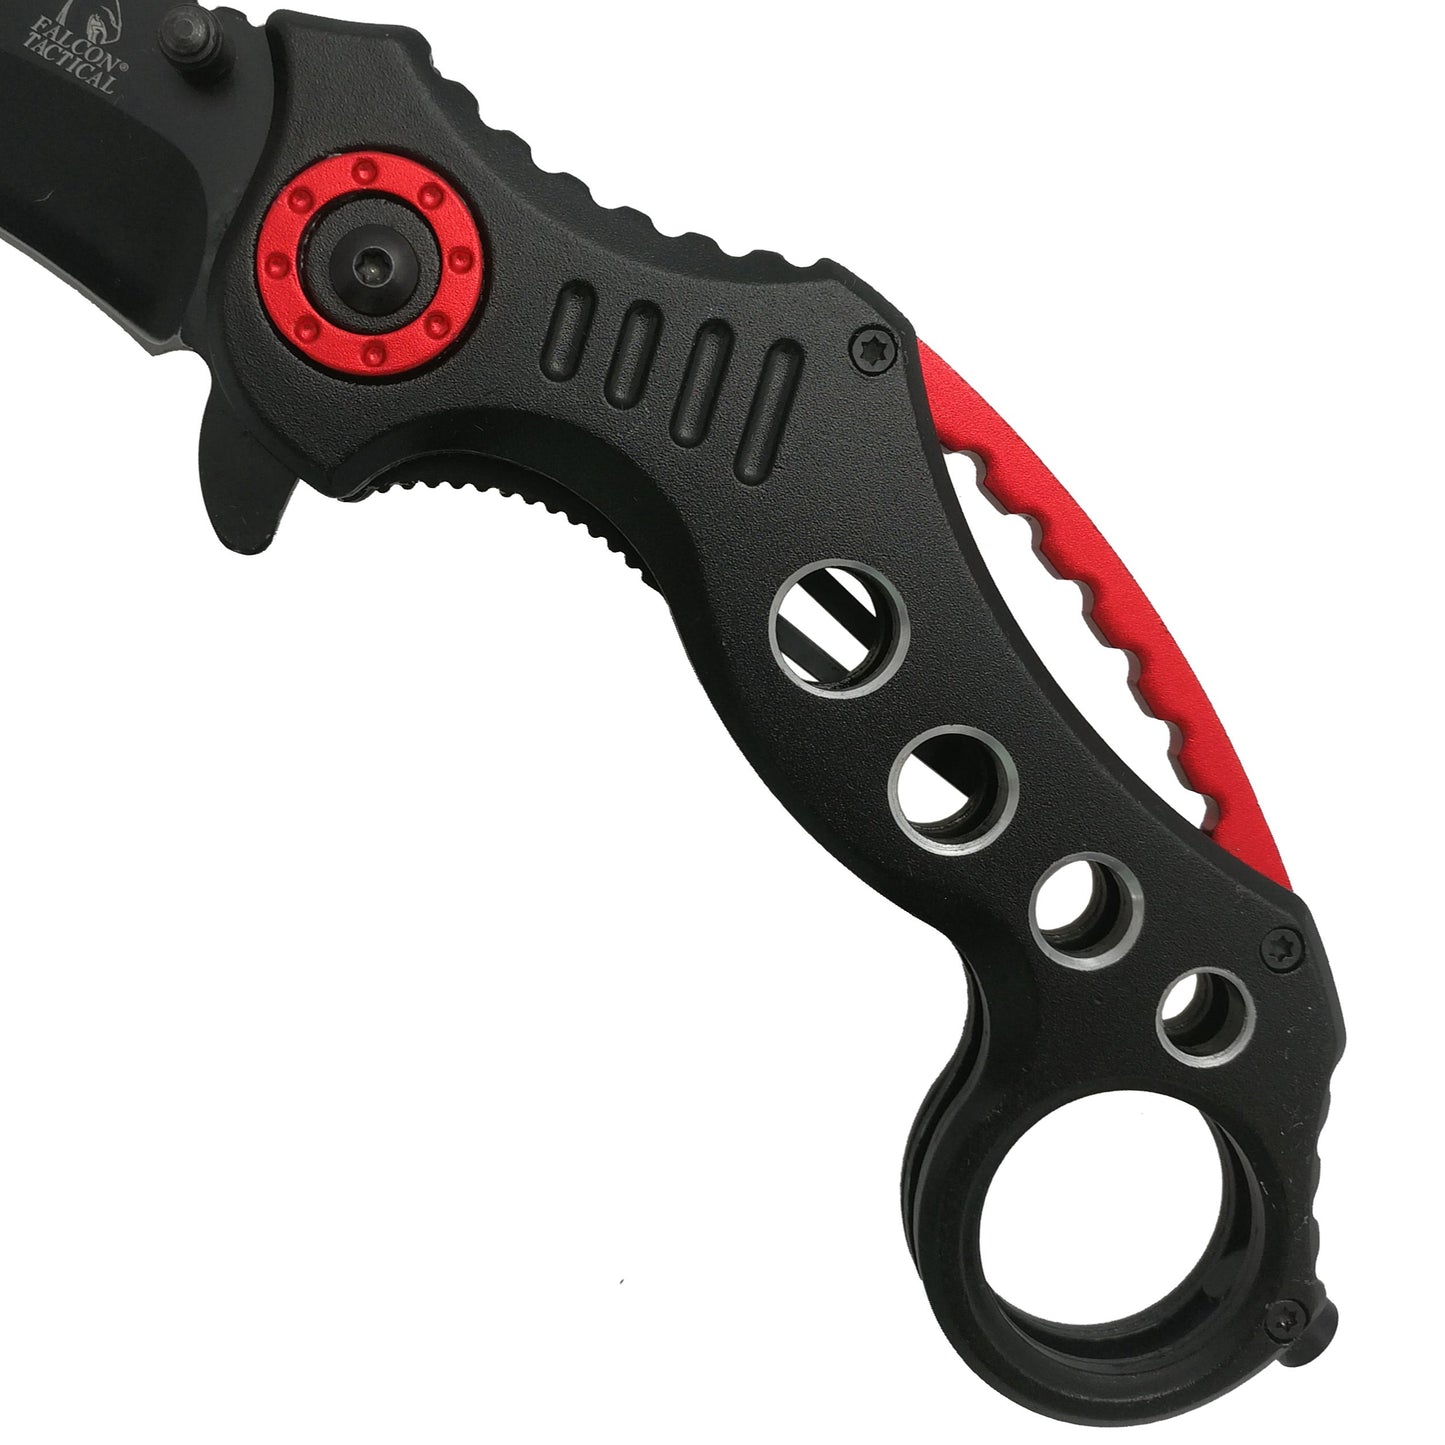 Falcon 7 1/2" Overall Black and Red Folding Knife